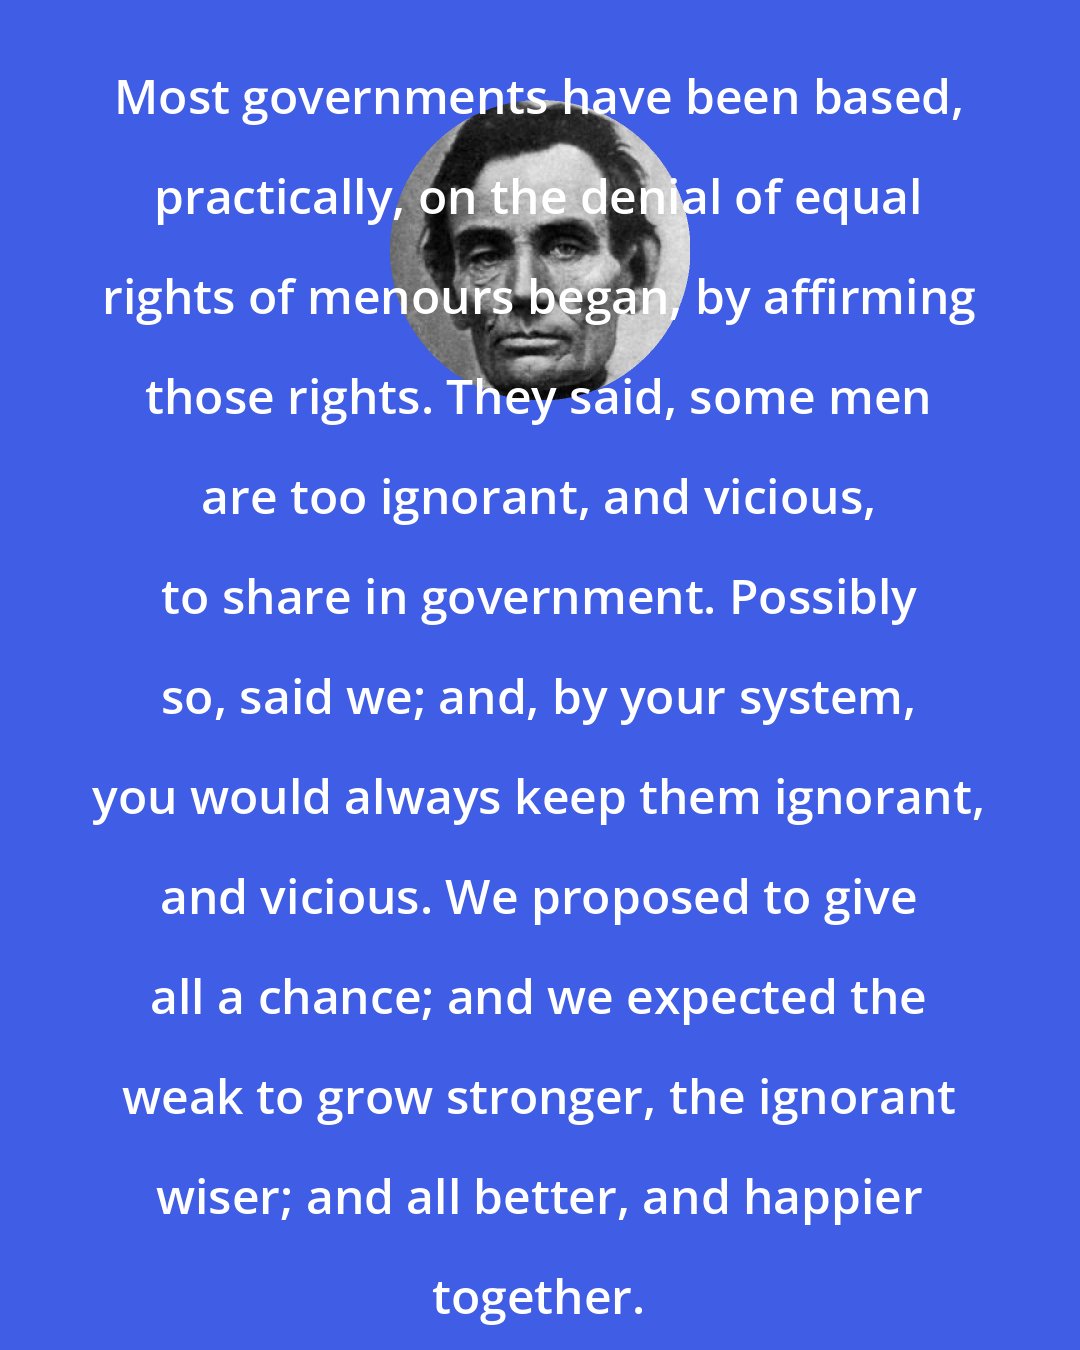 Abraham Lincoln: Most governments have been based, practically, on the denial of equal rights of menours began, by affirming those rights. They said, some men are too ignorant, and vicious, to share in government. Possibly so, said we; and, by your system, you would always keep them ignorant, and vicious. We proposed to give all a chance; and we expected the weak to grow stronger, the ignorant wiser; and all better, and happier together.